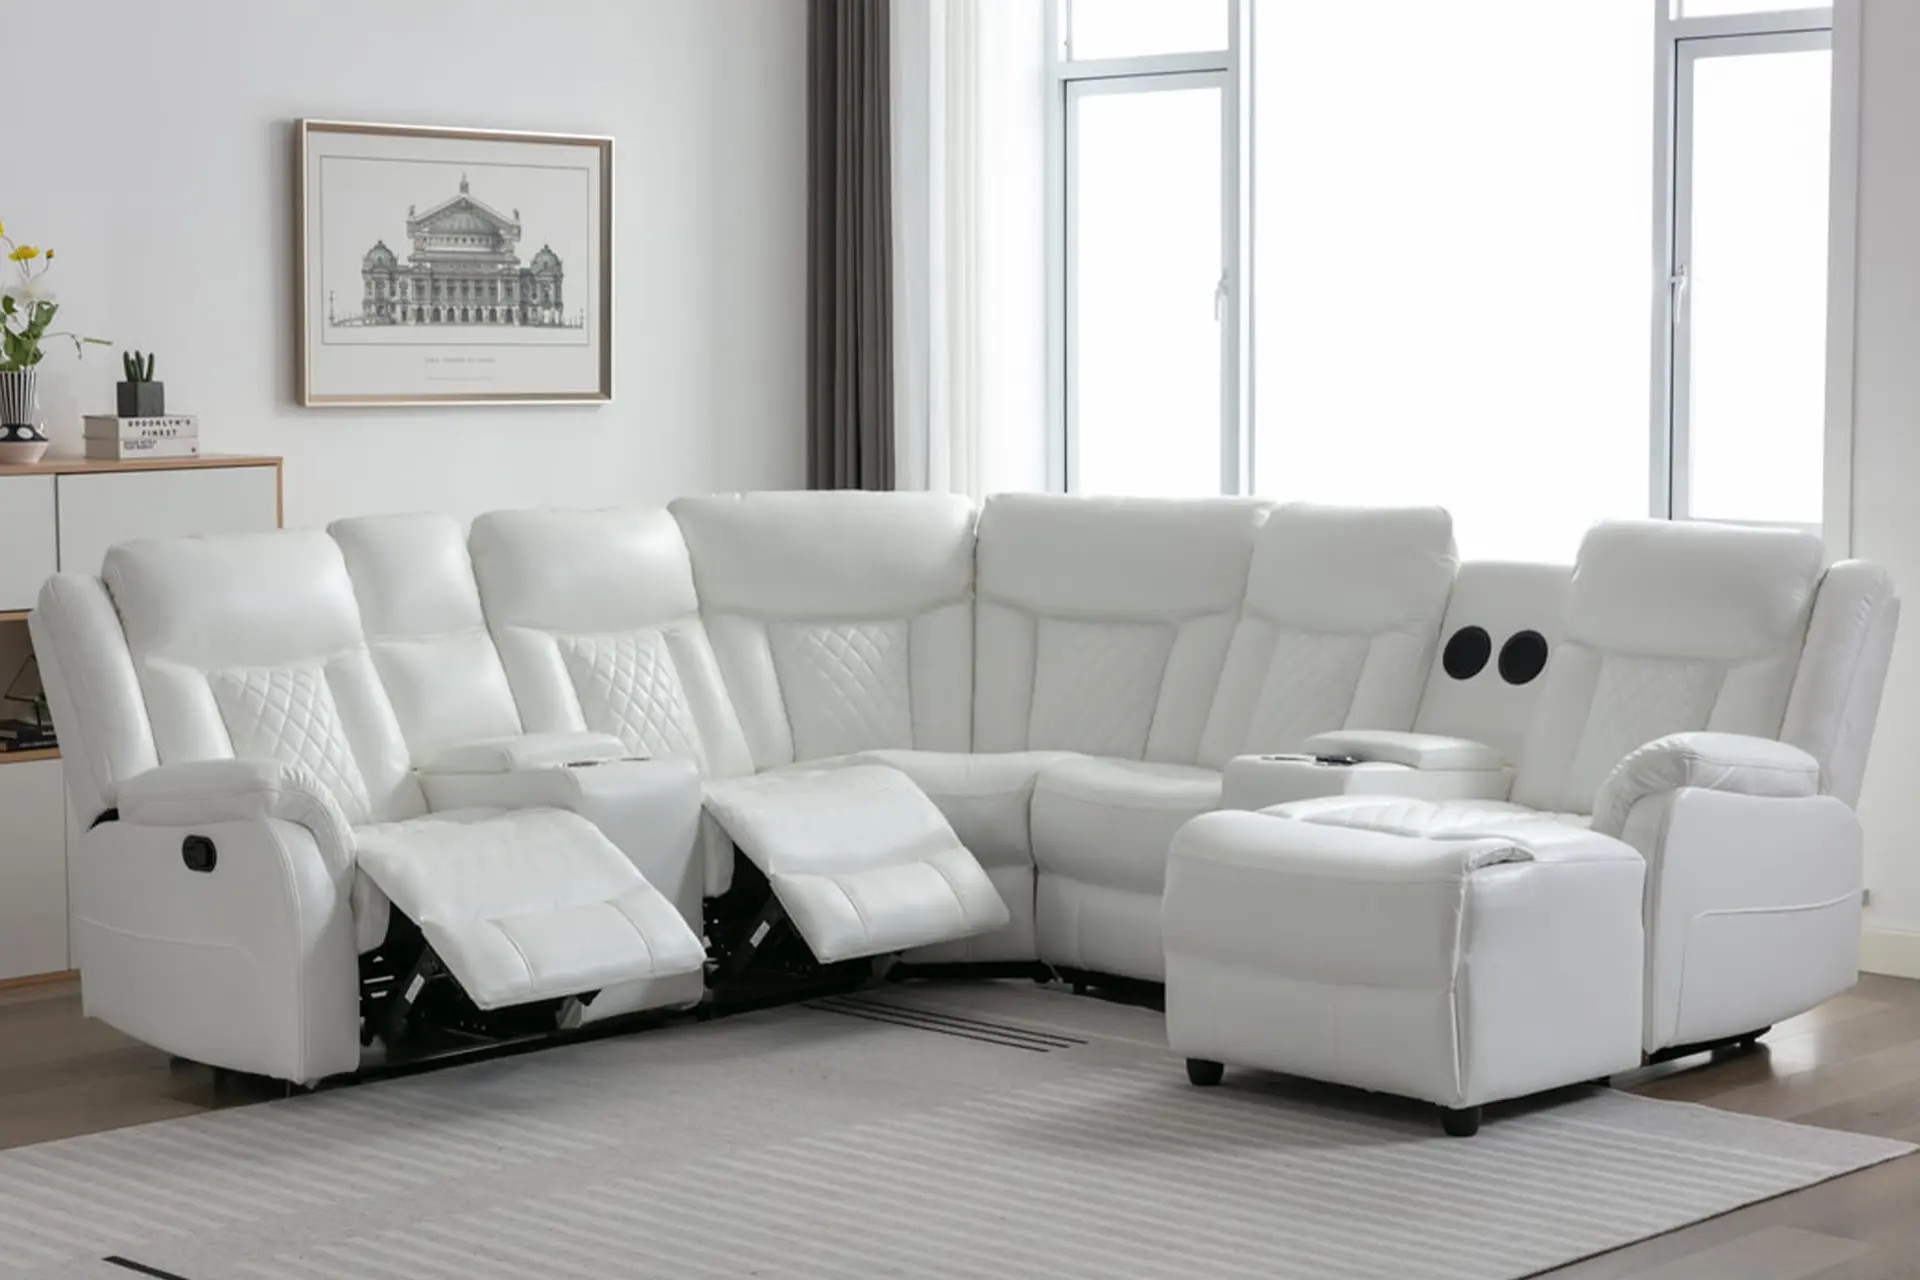 Champion White Reclining Sectional.